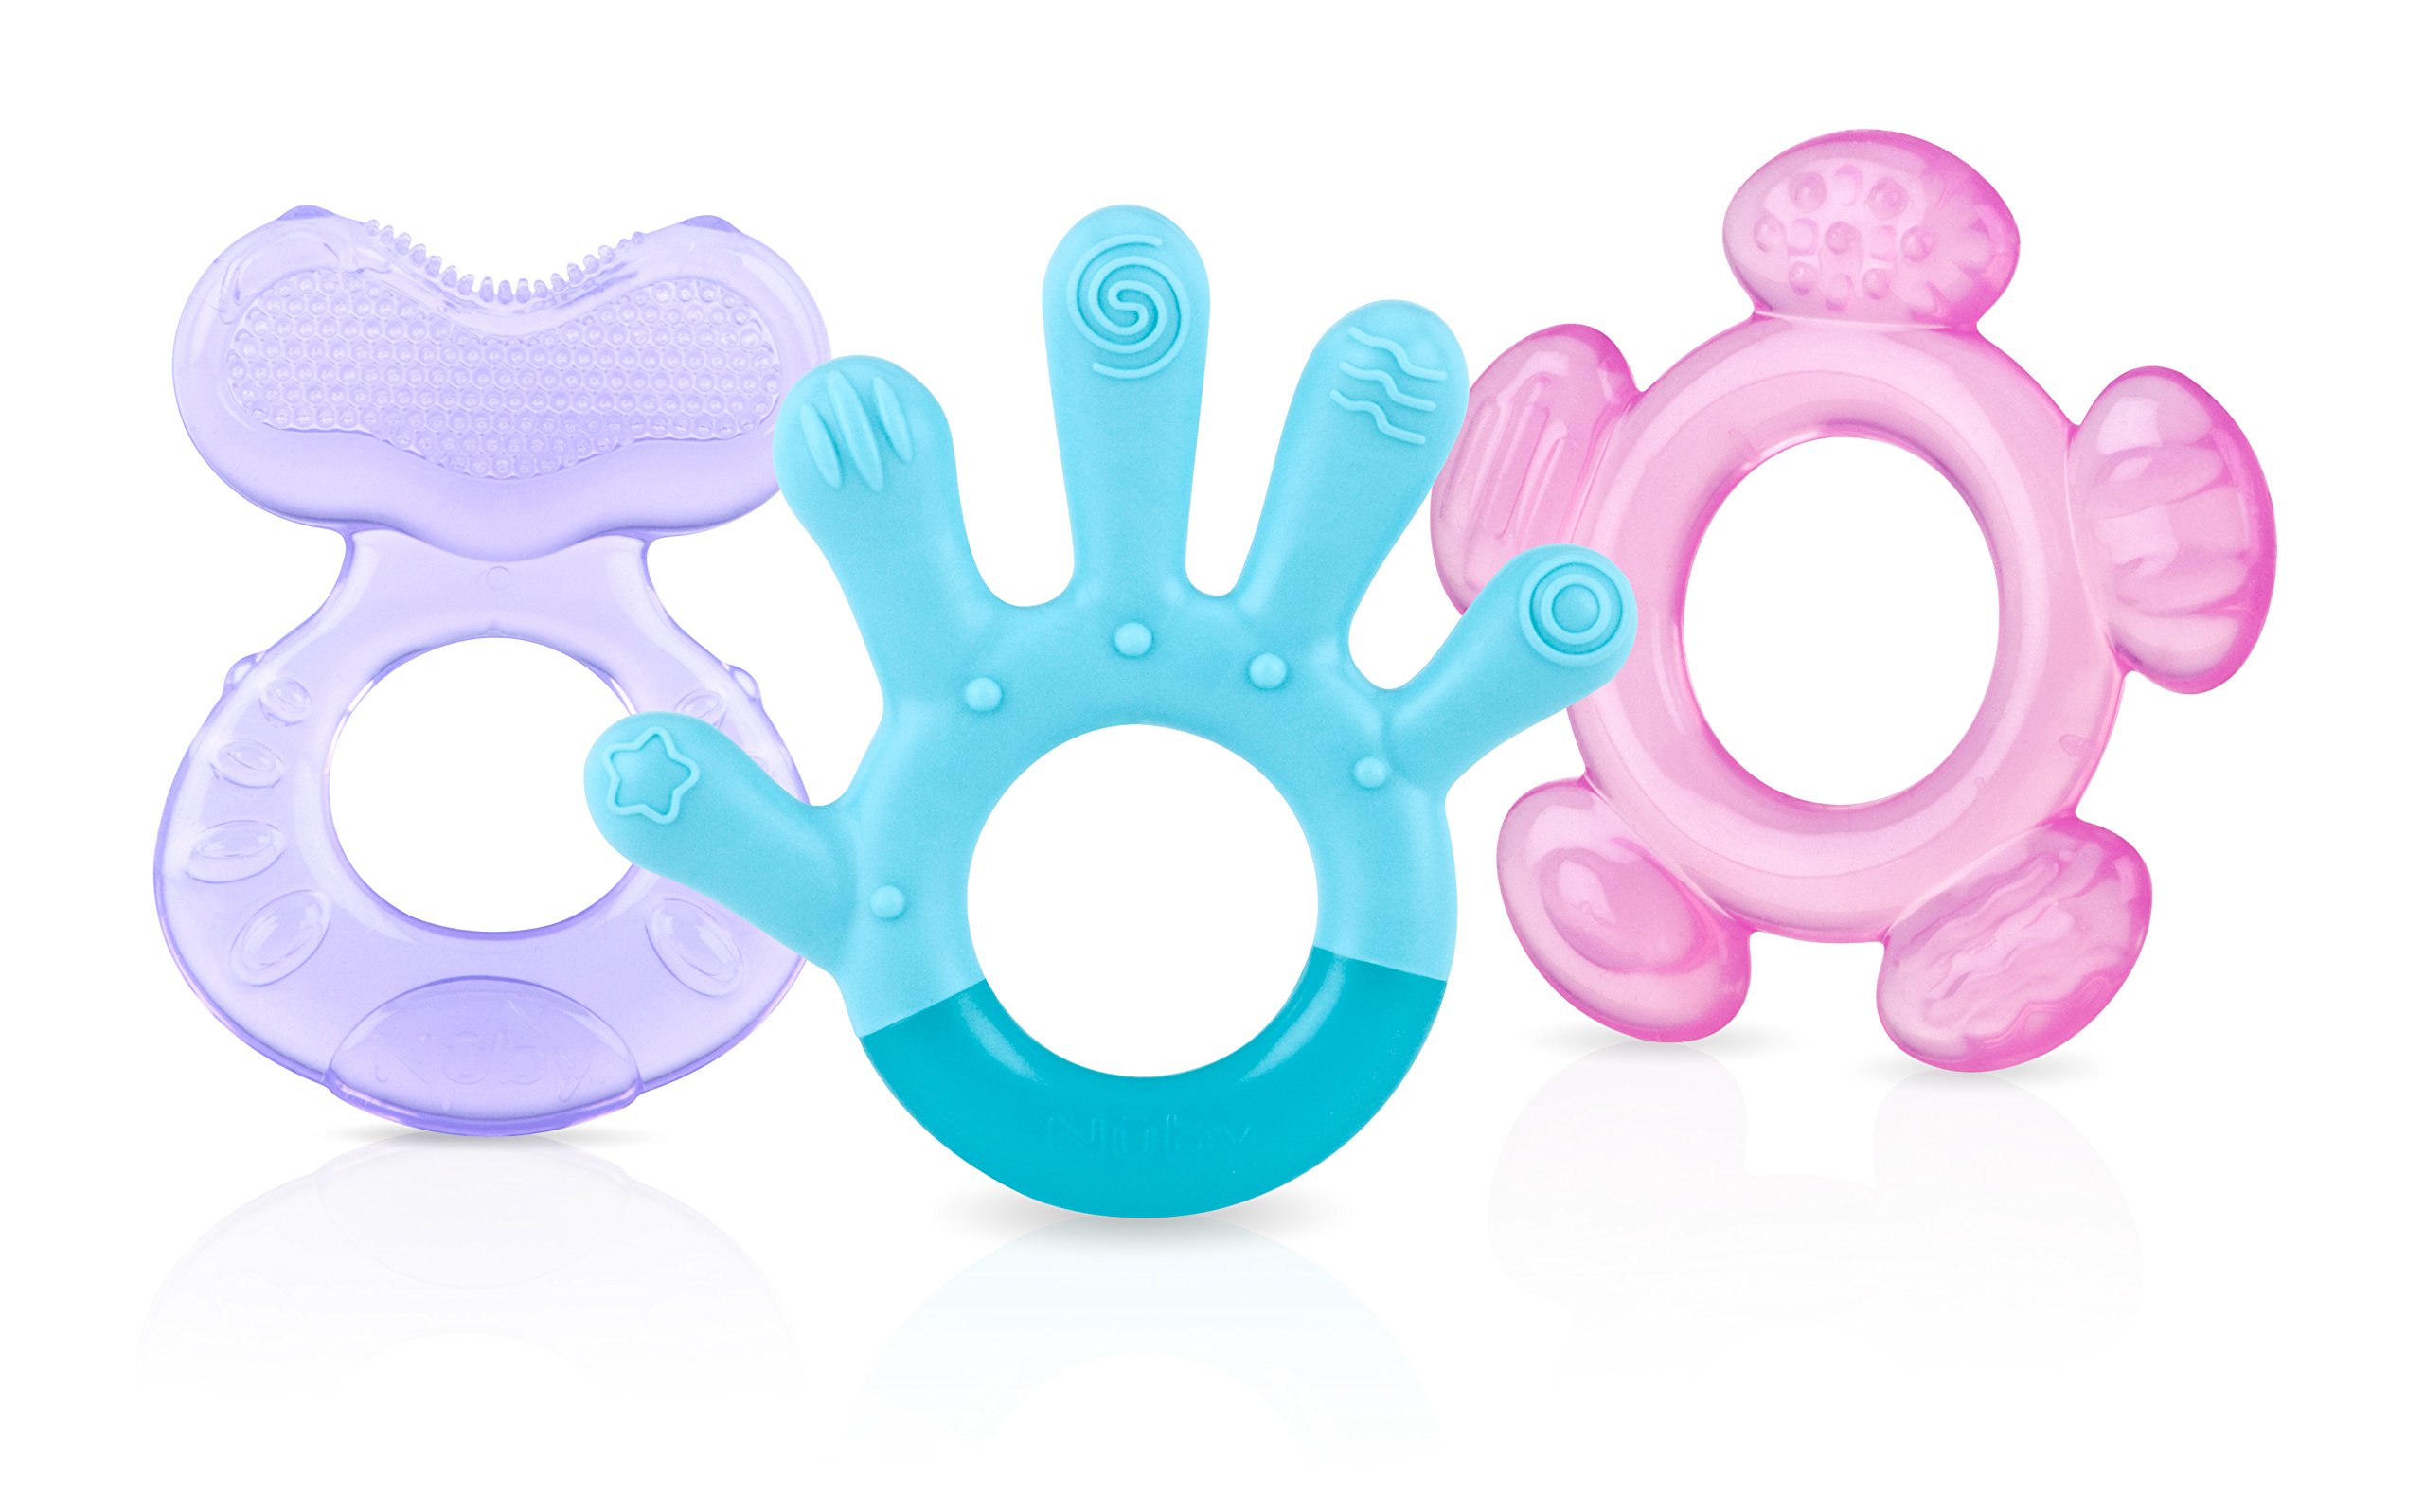 Nuby 3 Step Soothing Teether 3 Piece Set, BPA Free - Assorted Color